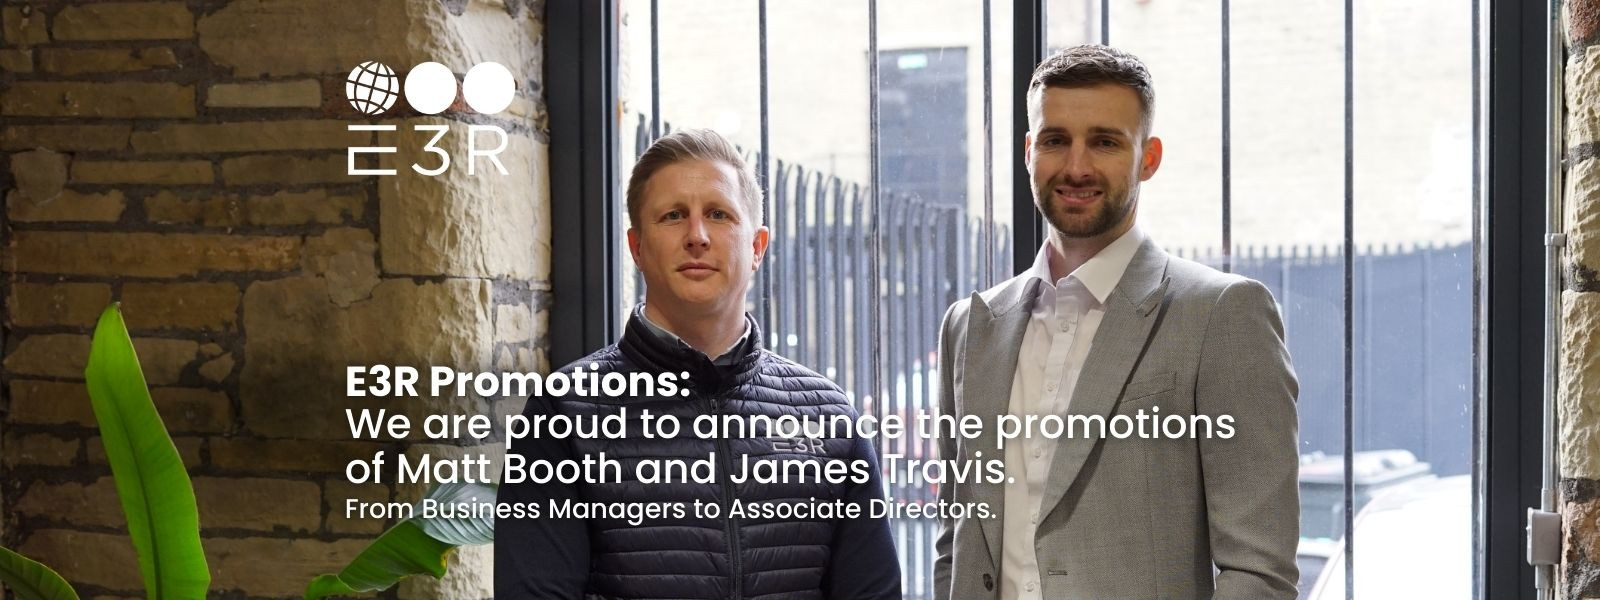 From Business Managers to Associate Directors: E3 Recruitment is proud to announce the recent promotions of Matt Booth and James Travis.